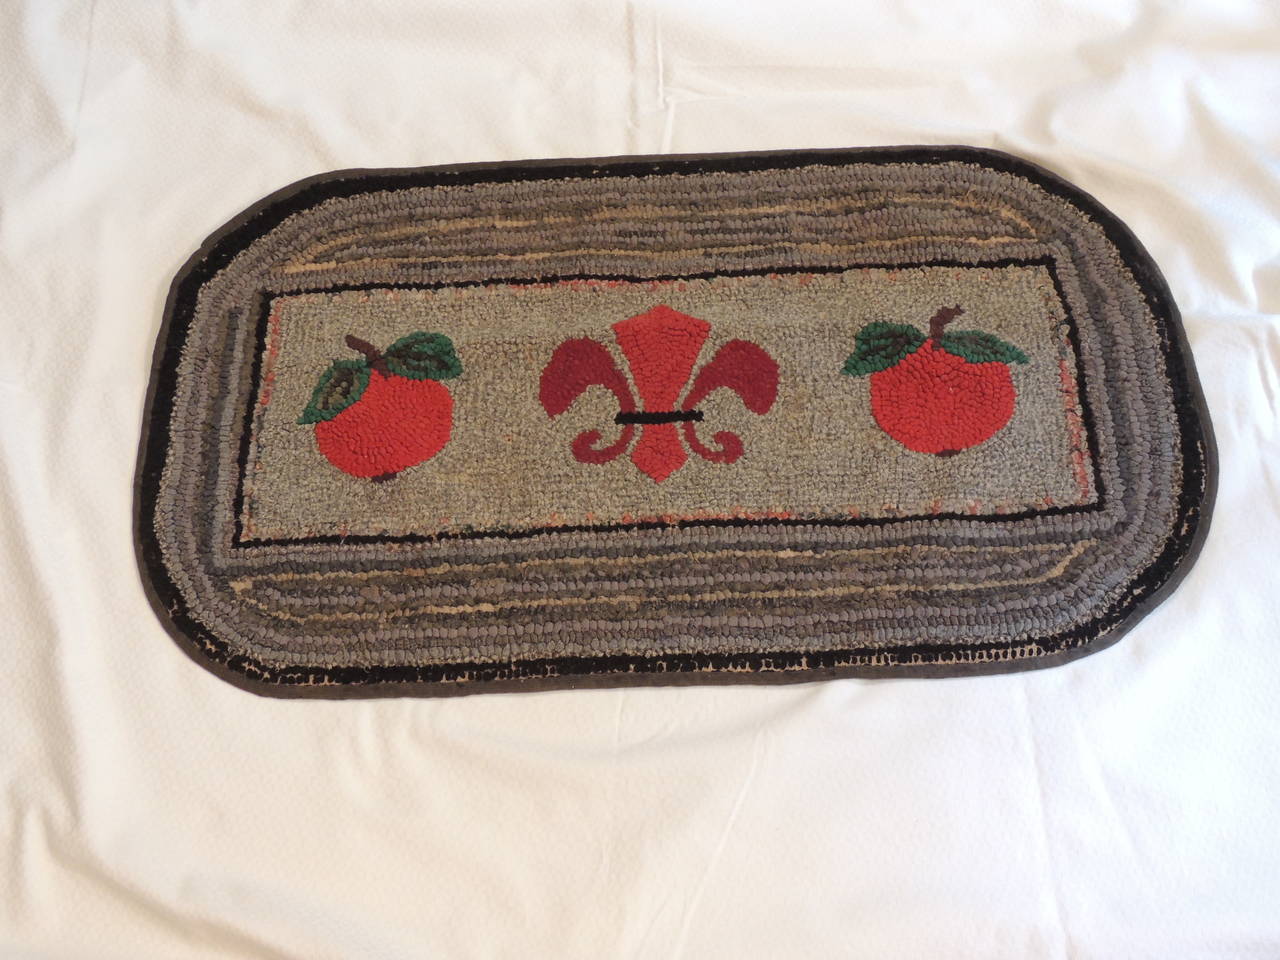 Antique Textiles Galleries...
Primitive oval hook rug, depicting fruits and Fleur-de-lis center. In shades of red, orange, green, grey and black.
Rug hooking is both an art and a craft where rugs are made by pulling loops of yarn or fabric through a